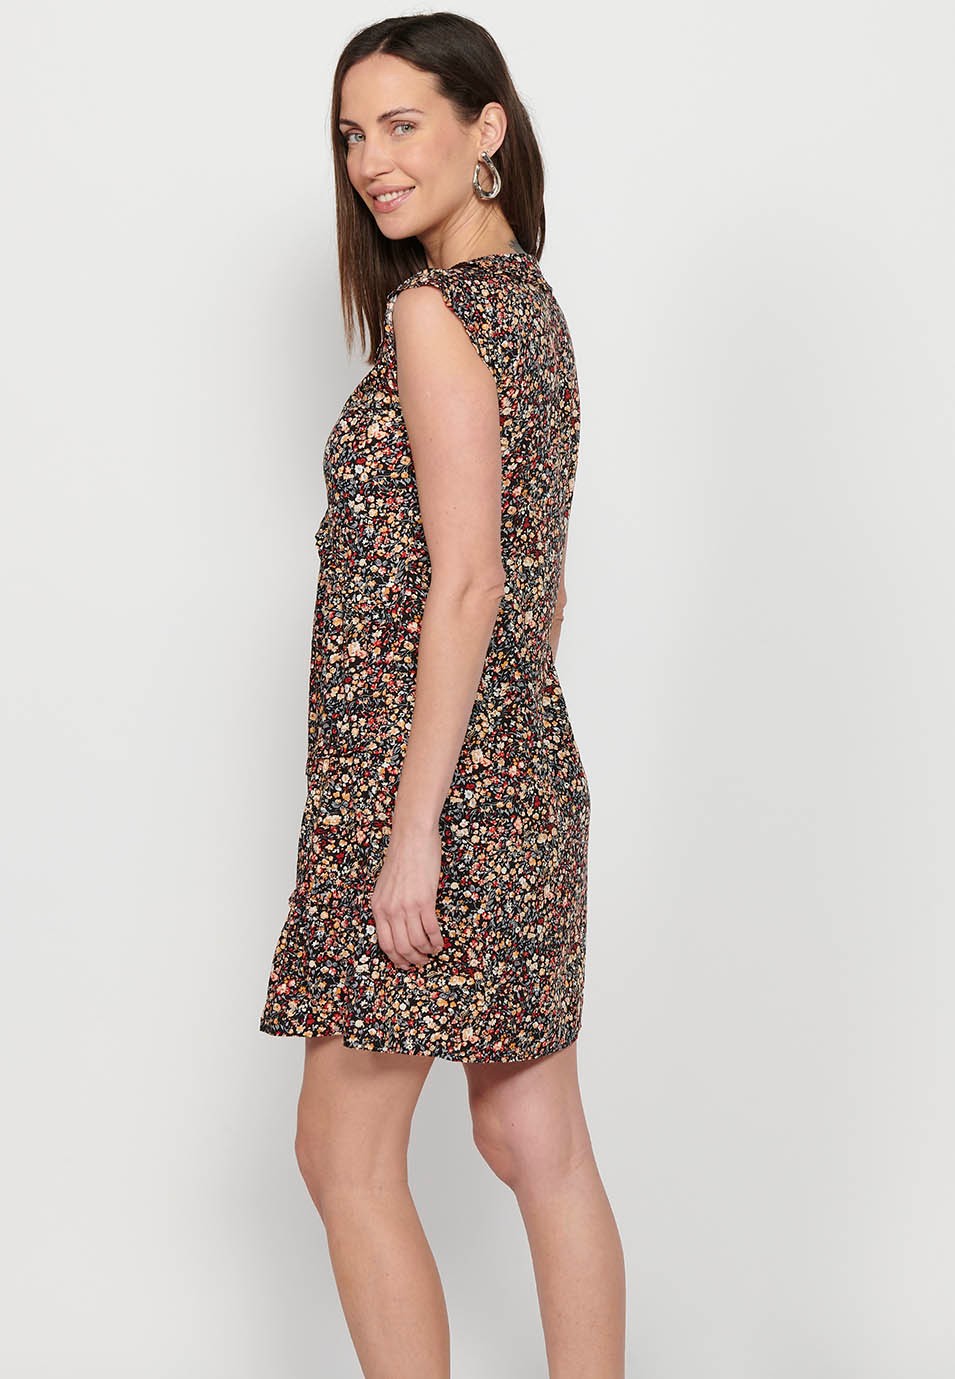 Short sleeveless dress with ruffle detail on the shoulders with V-neckline and Multicolor floral print for Women 7